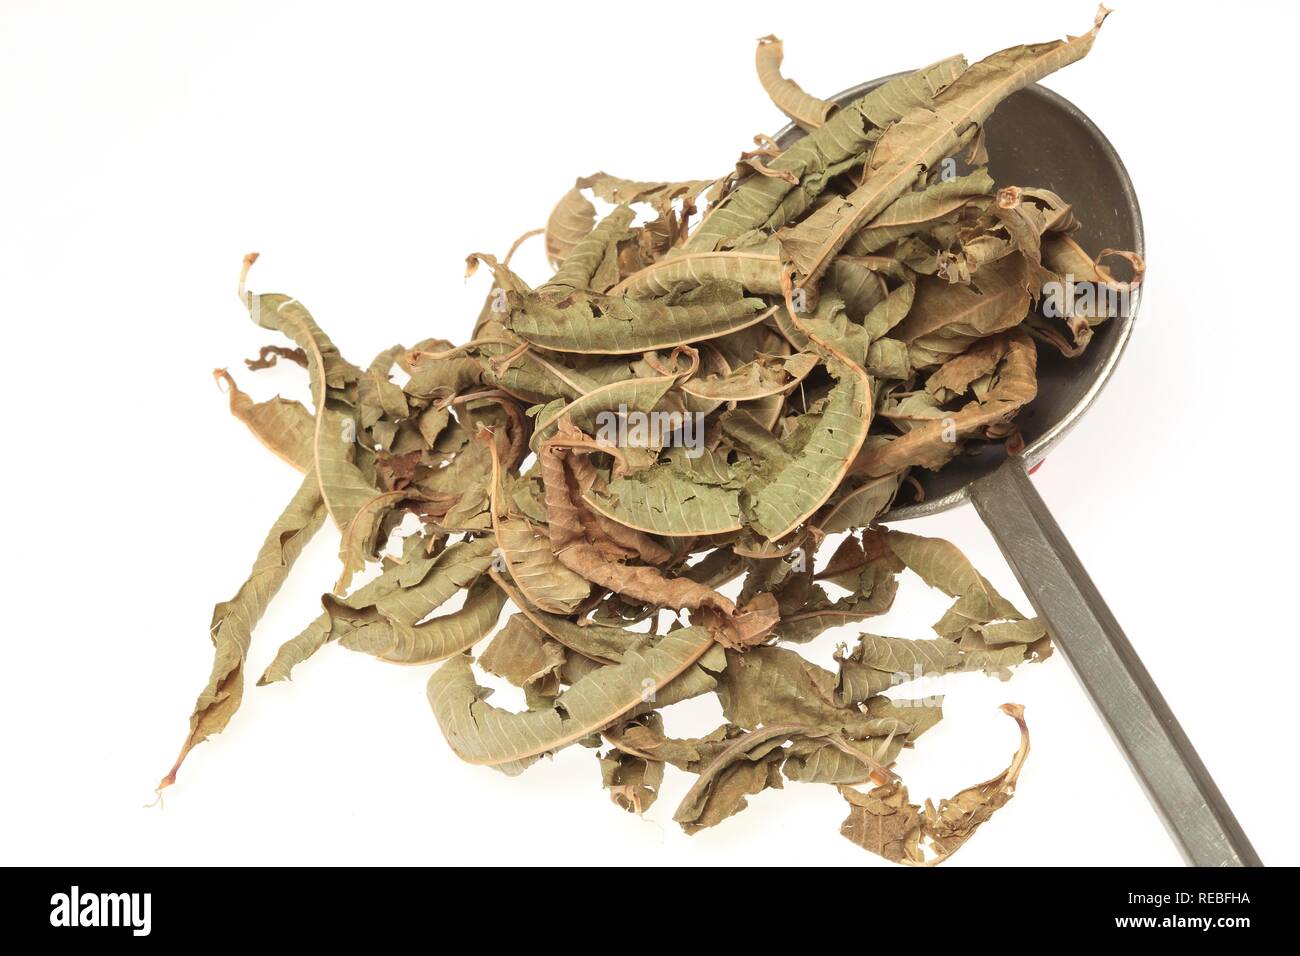 Dried leaves of the medicinal plant Common Vervain (Verbena officinalis) Stock Photo